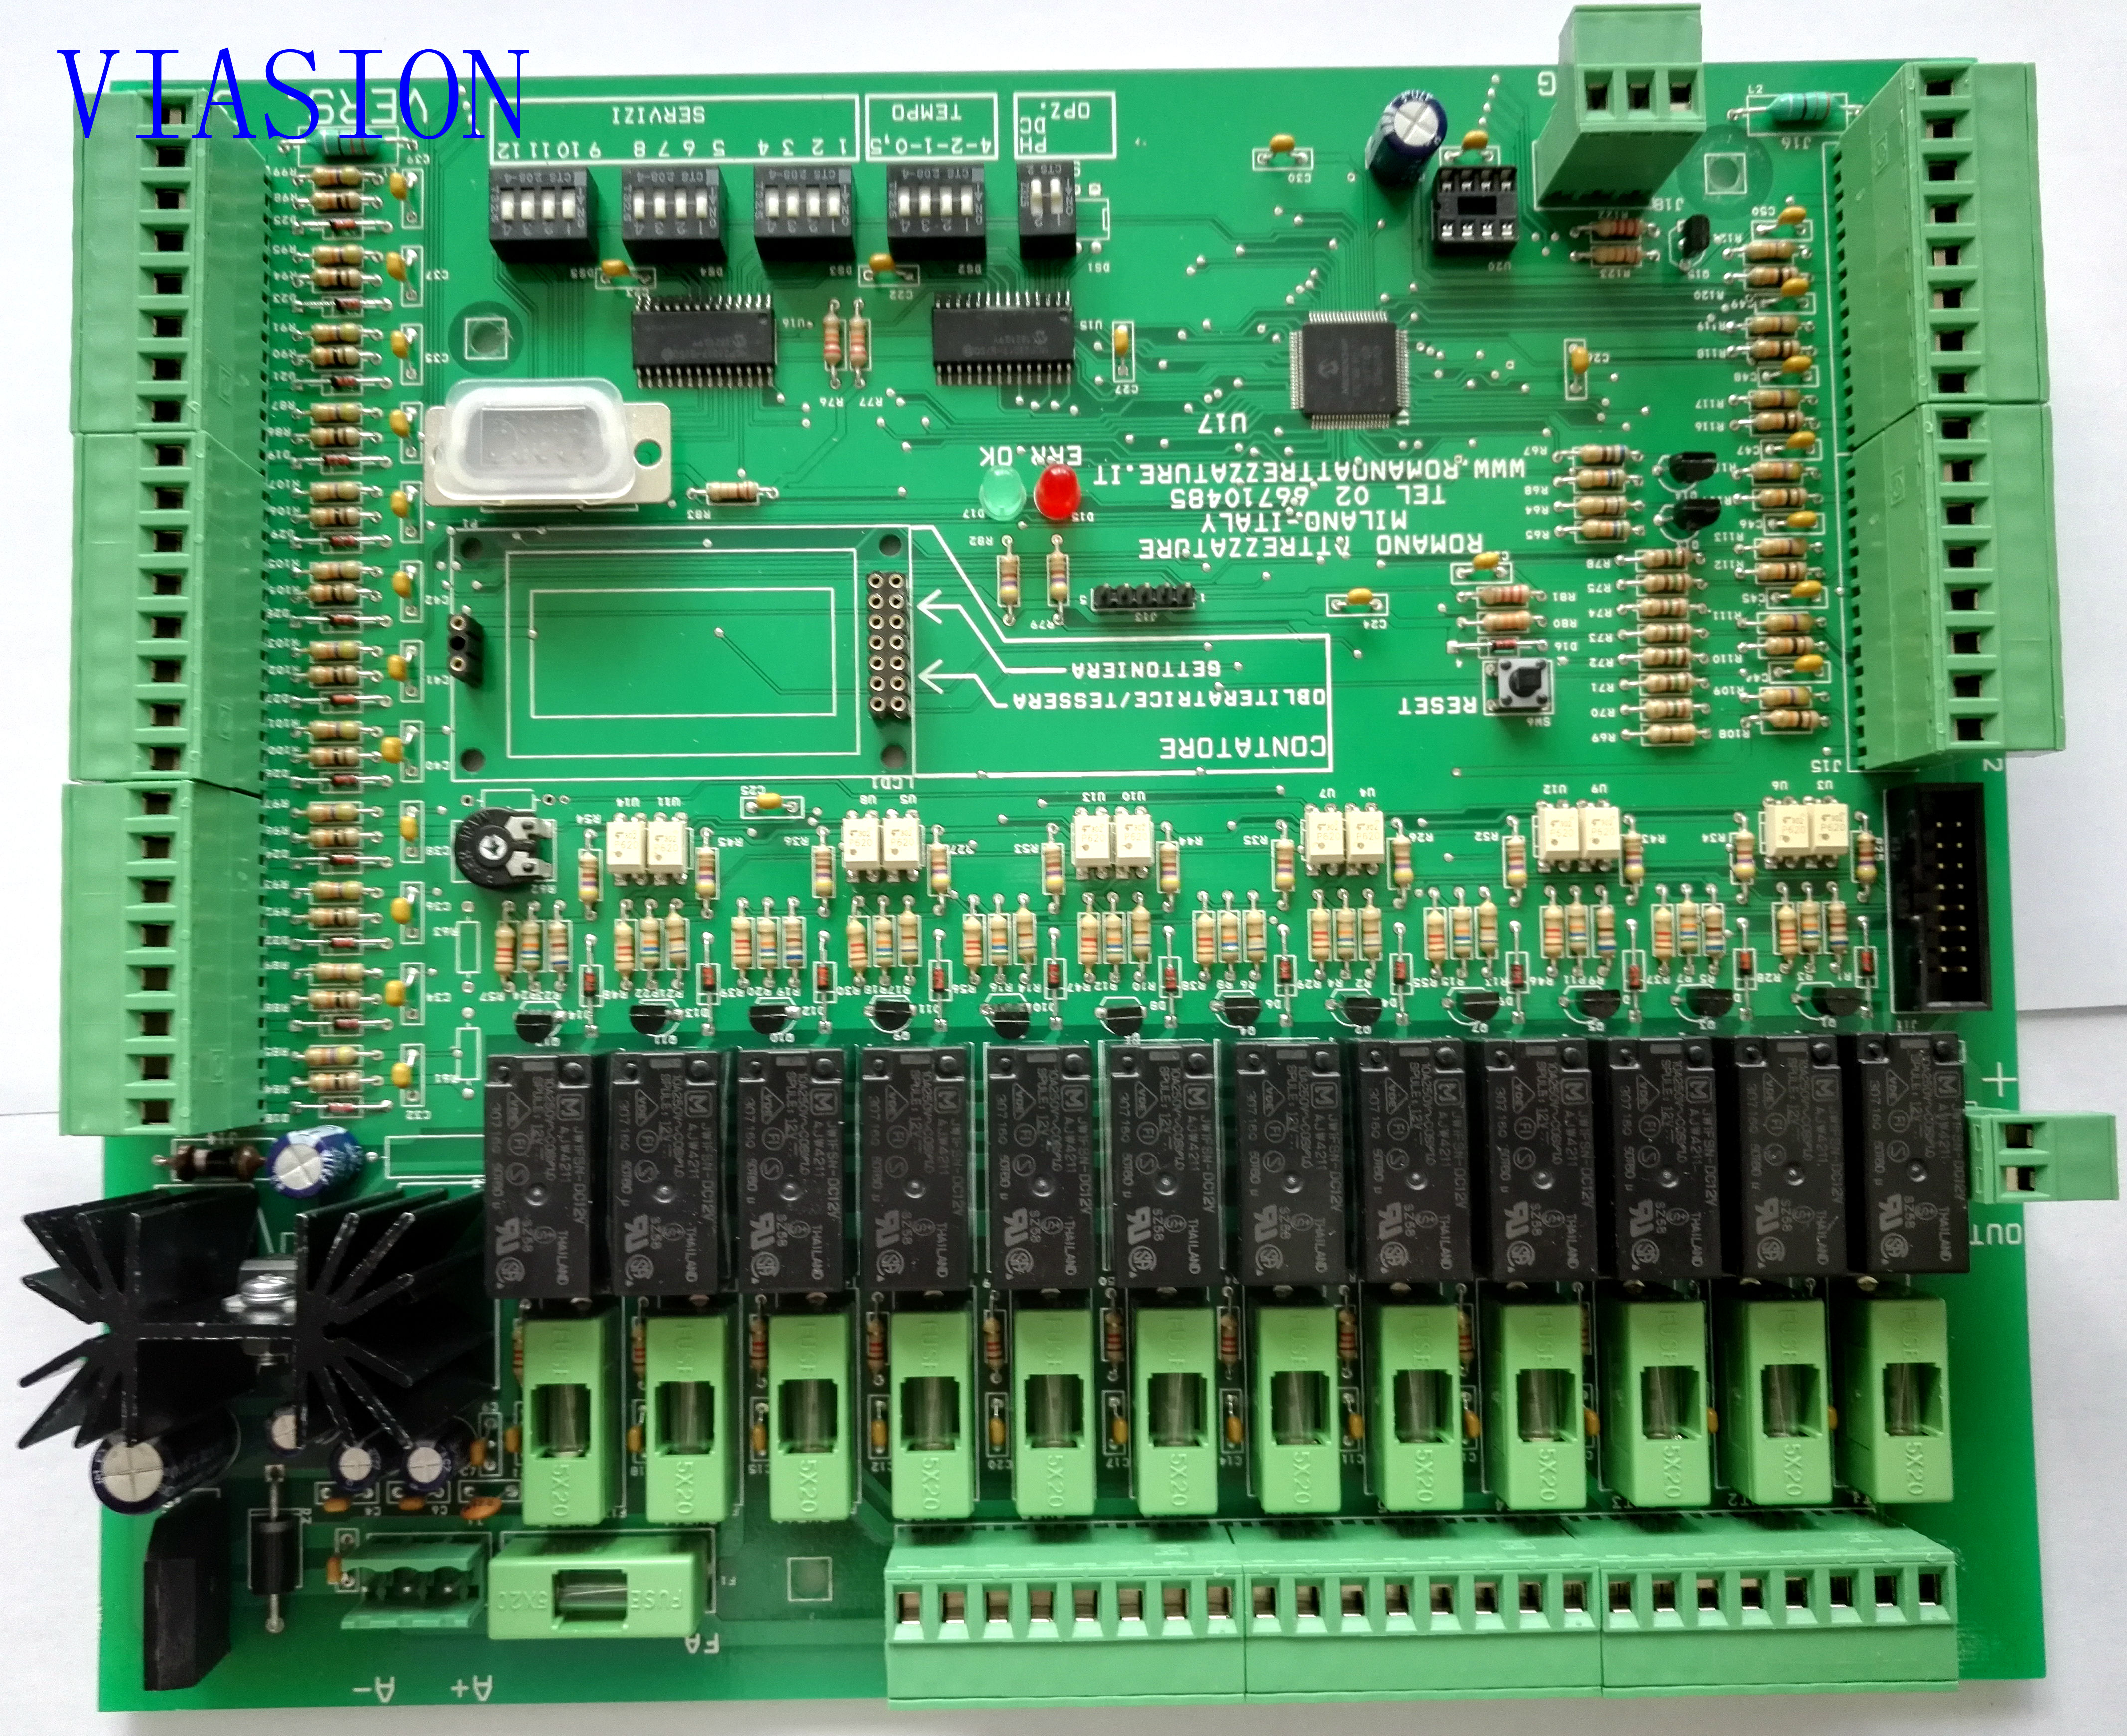 Box builds and supplying chain management PCB, component sourcing for netbooks